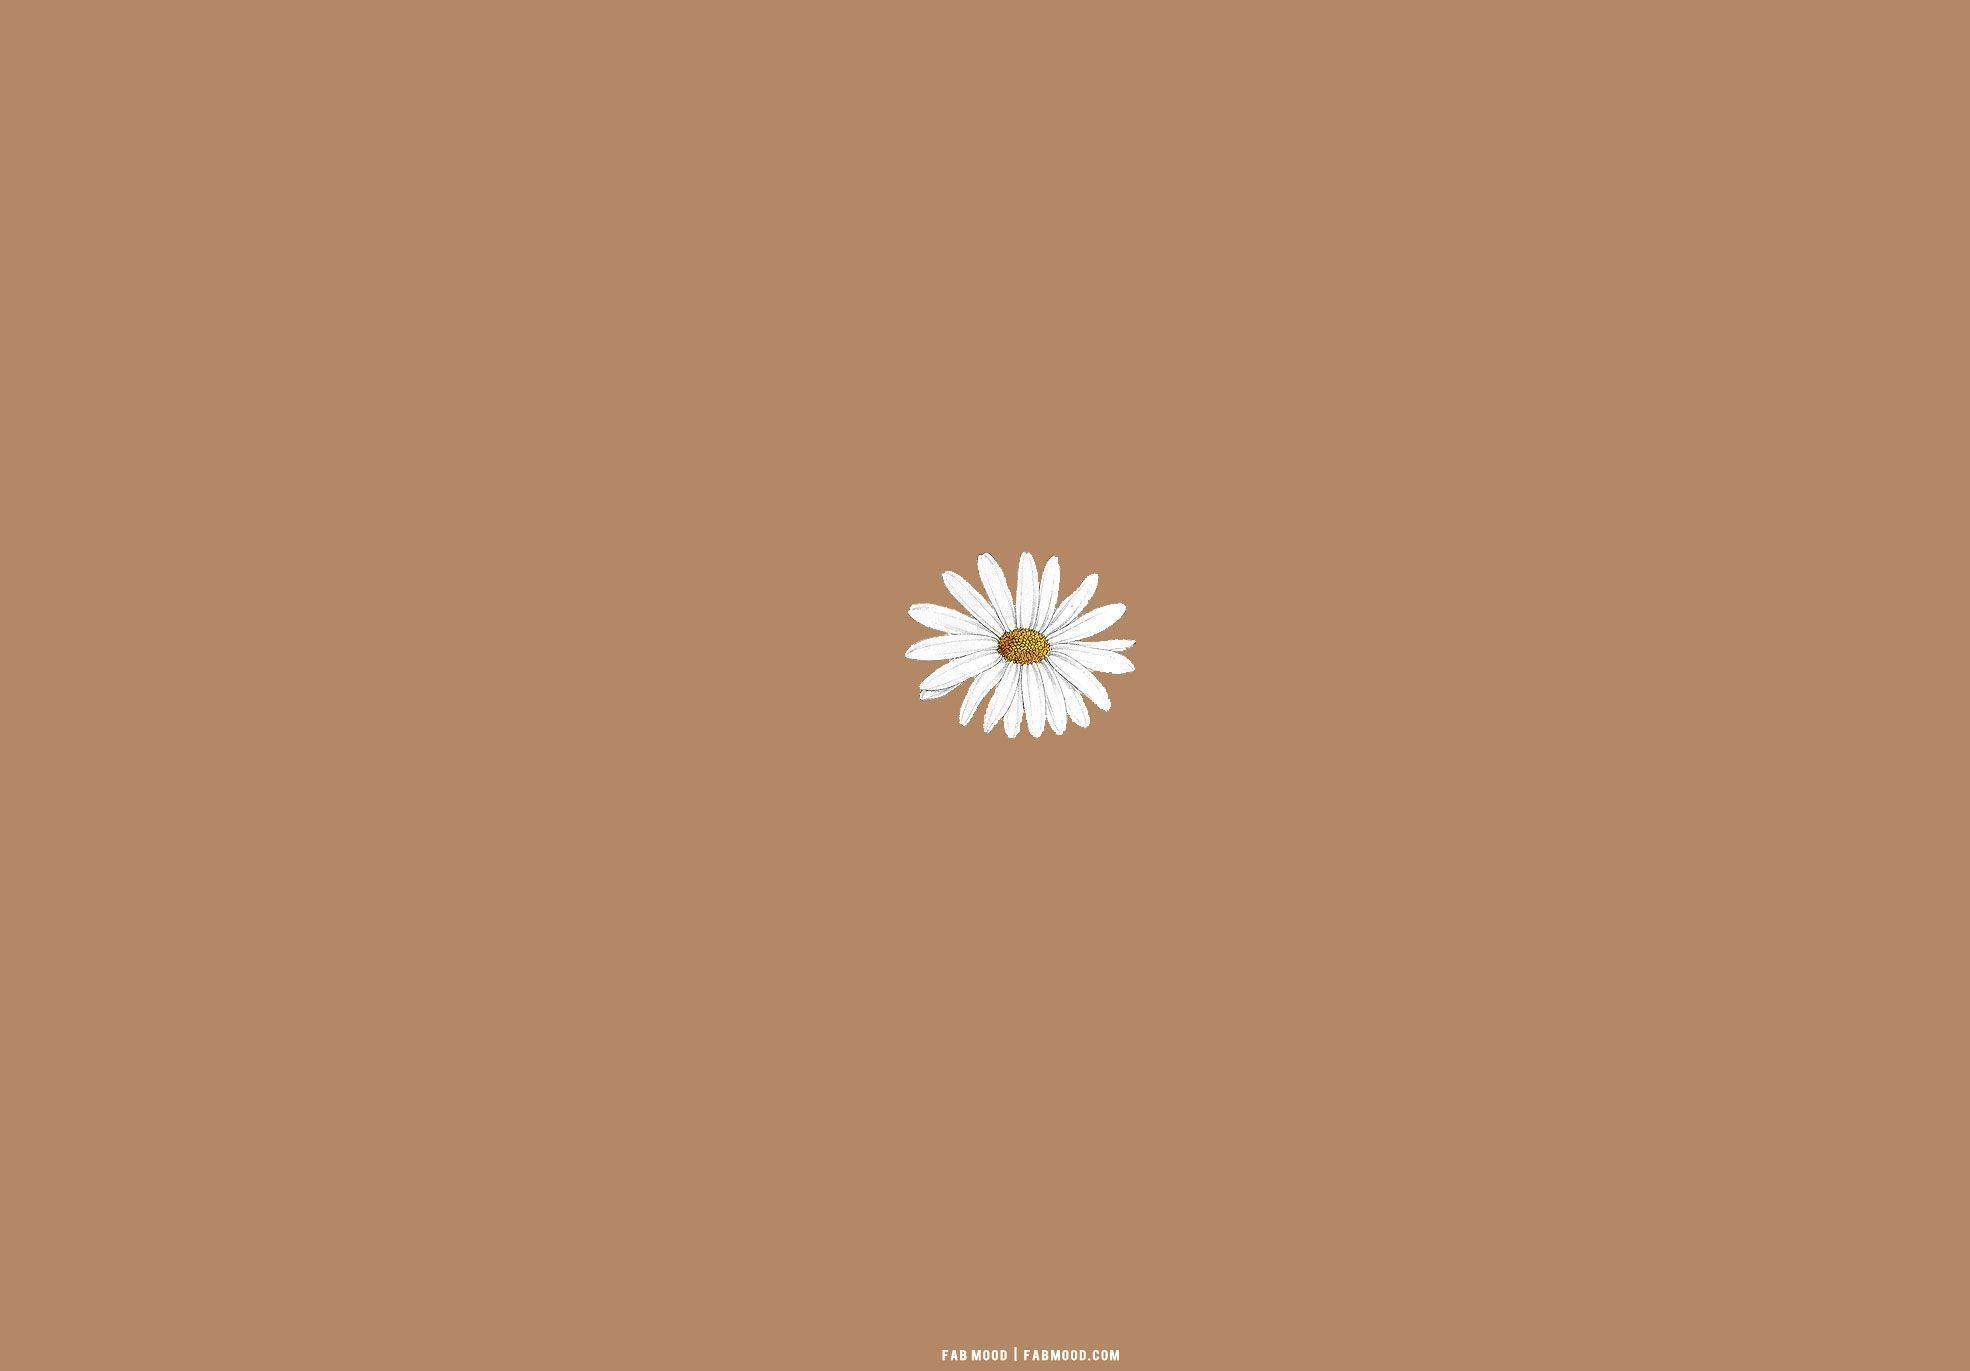 A white daisy on brown background - Laptop, desktop, computer, November, beige, brown, light brown, simple, January, August, wedding, couple, warm